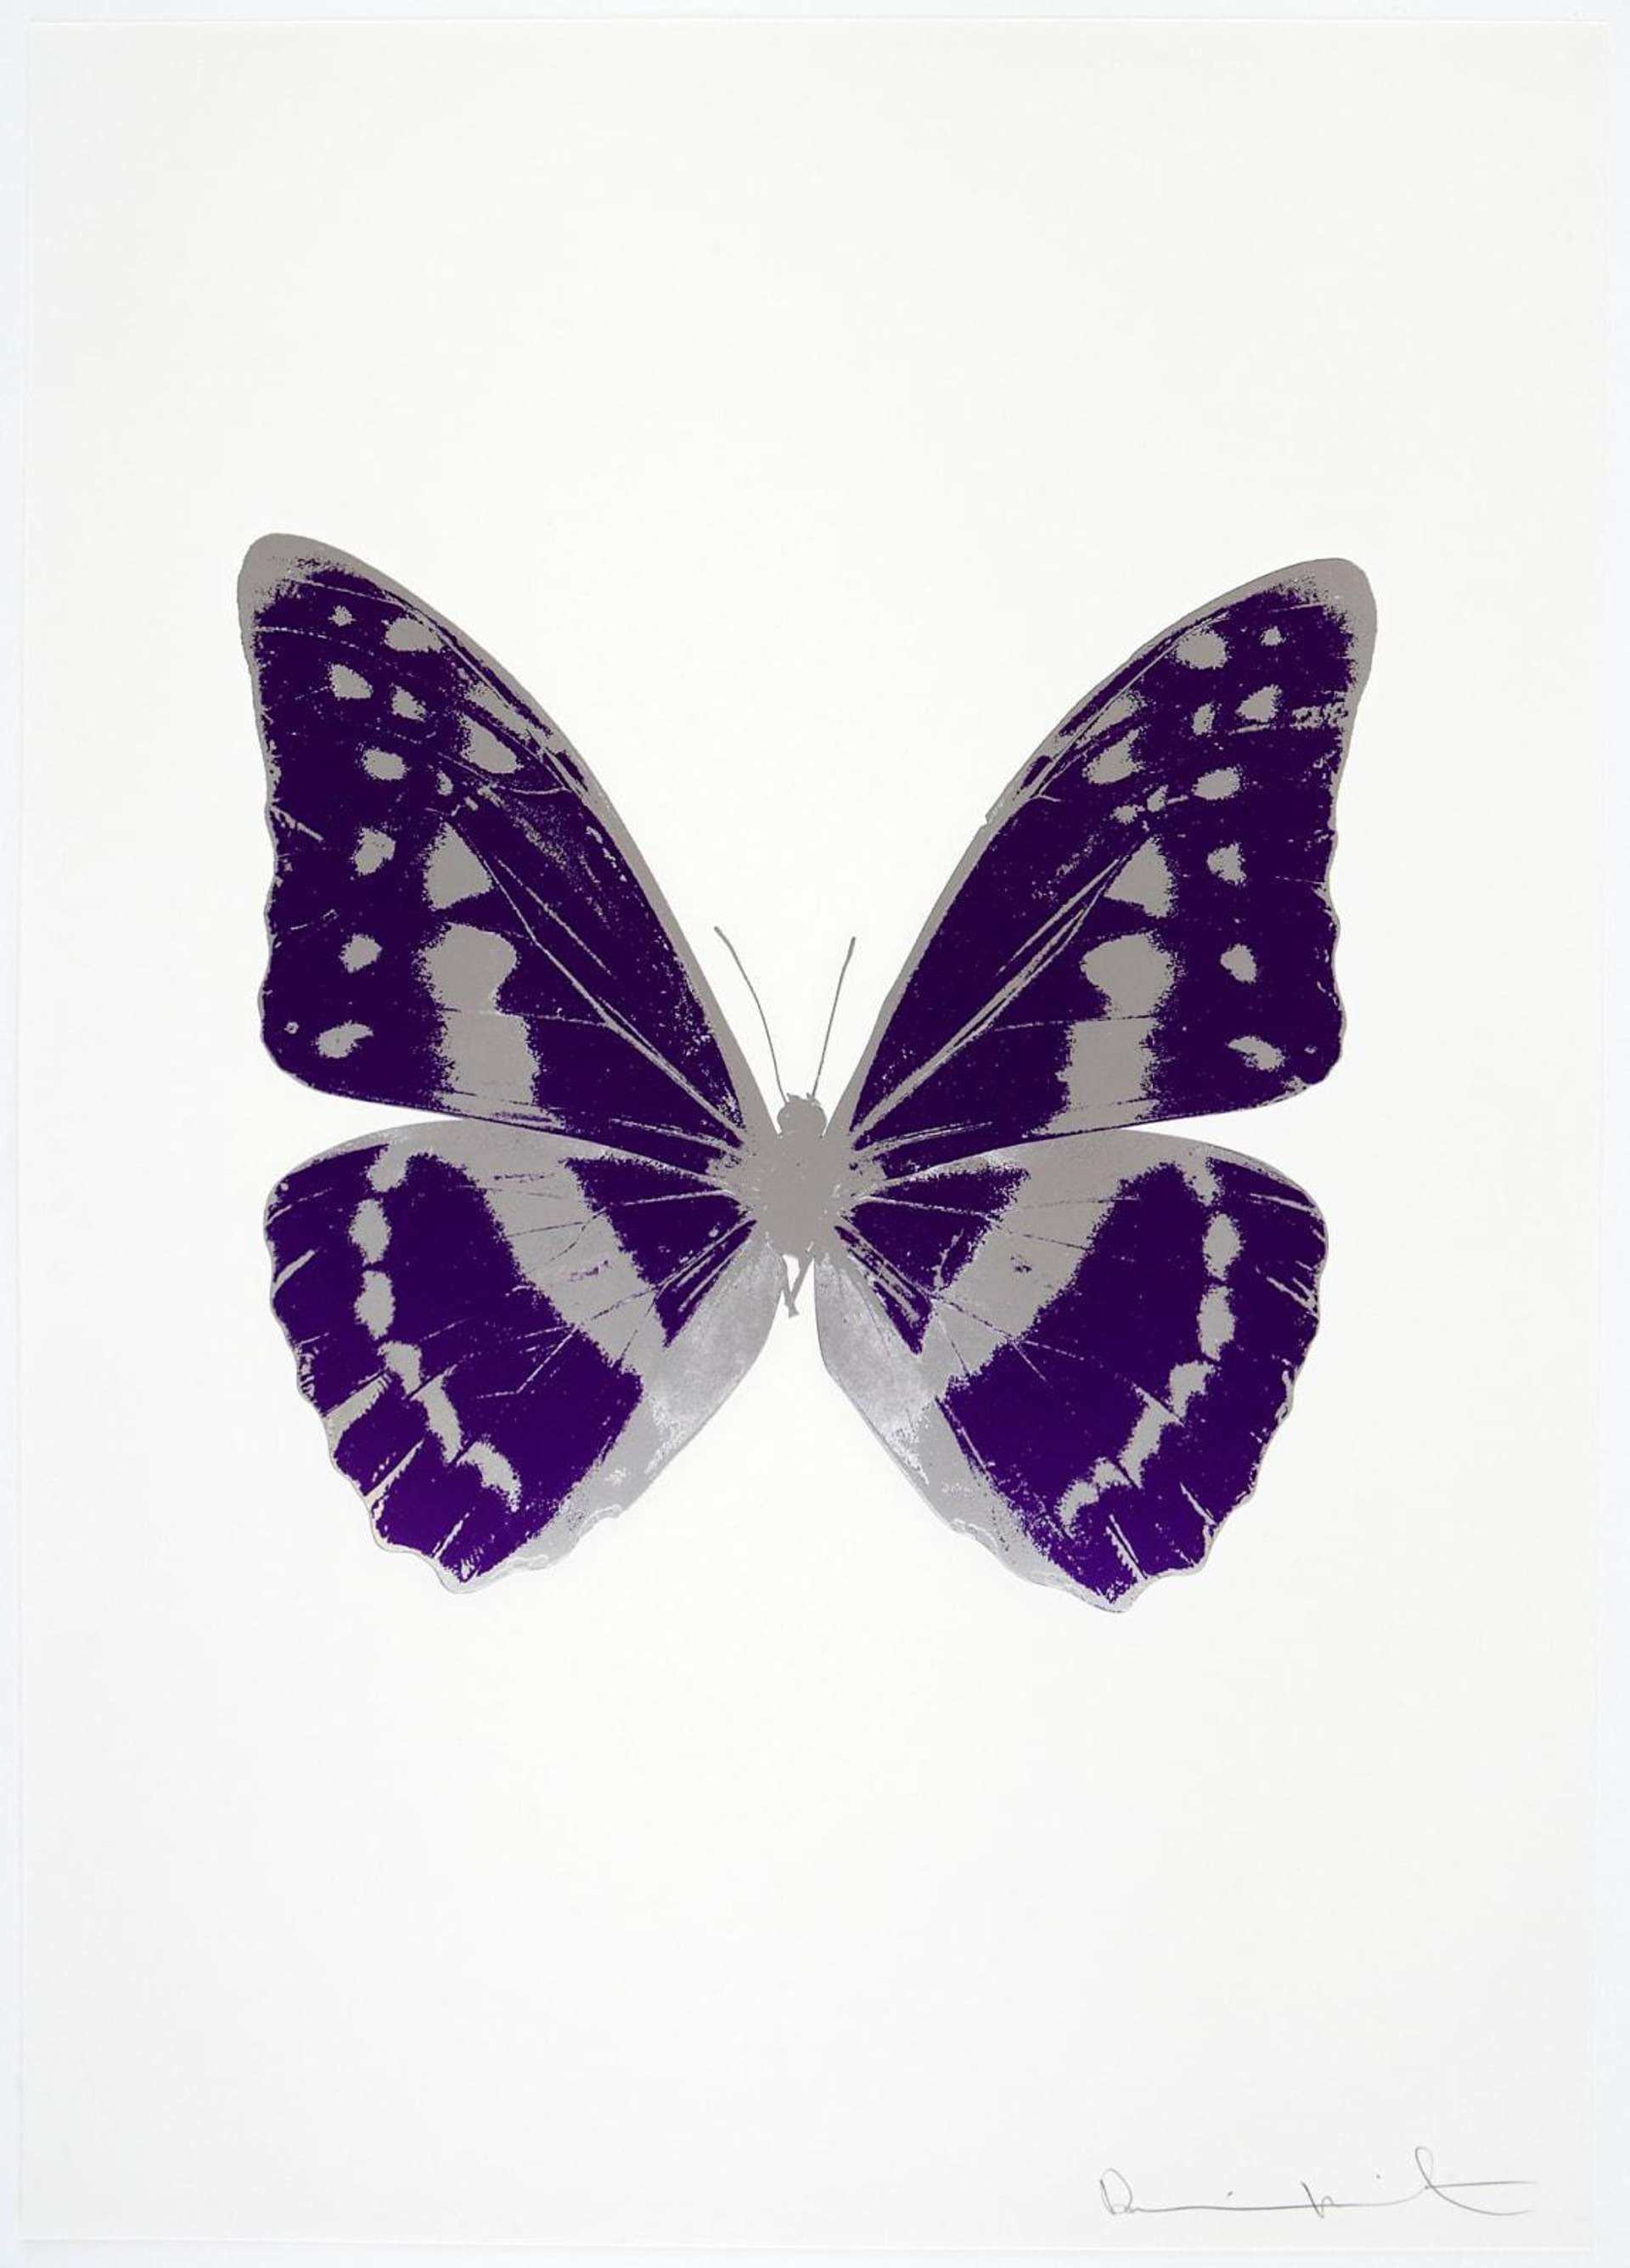 The Souls III (imperial purple, silver gloss) - Signed Print by Damien Hirst 2010 - MyArtBroker